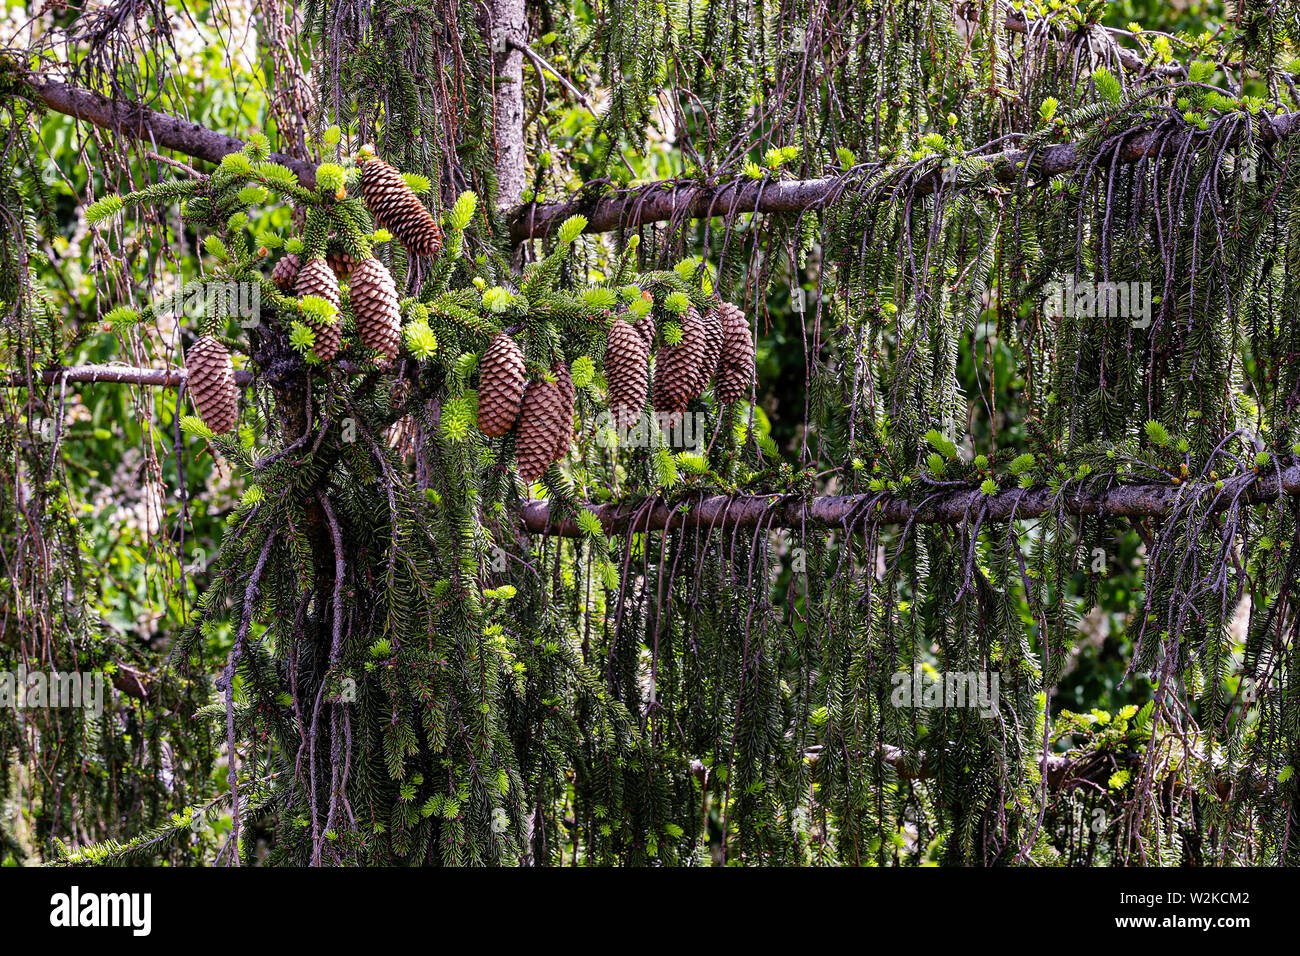 Hanging pine cones on a tree Stock Photo